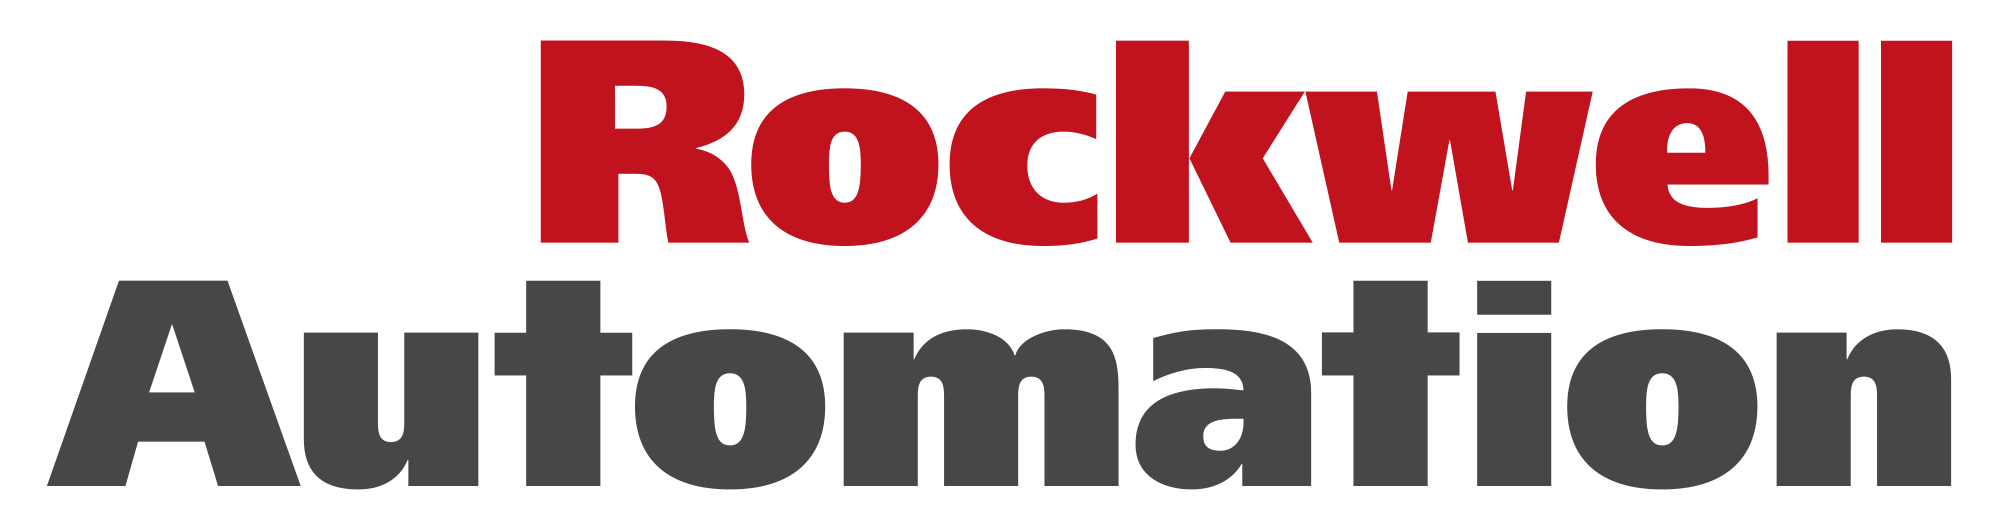 Rockwell Automation Inc